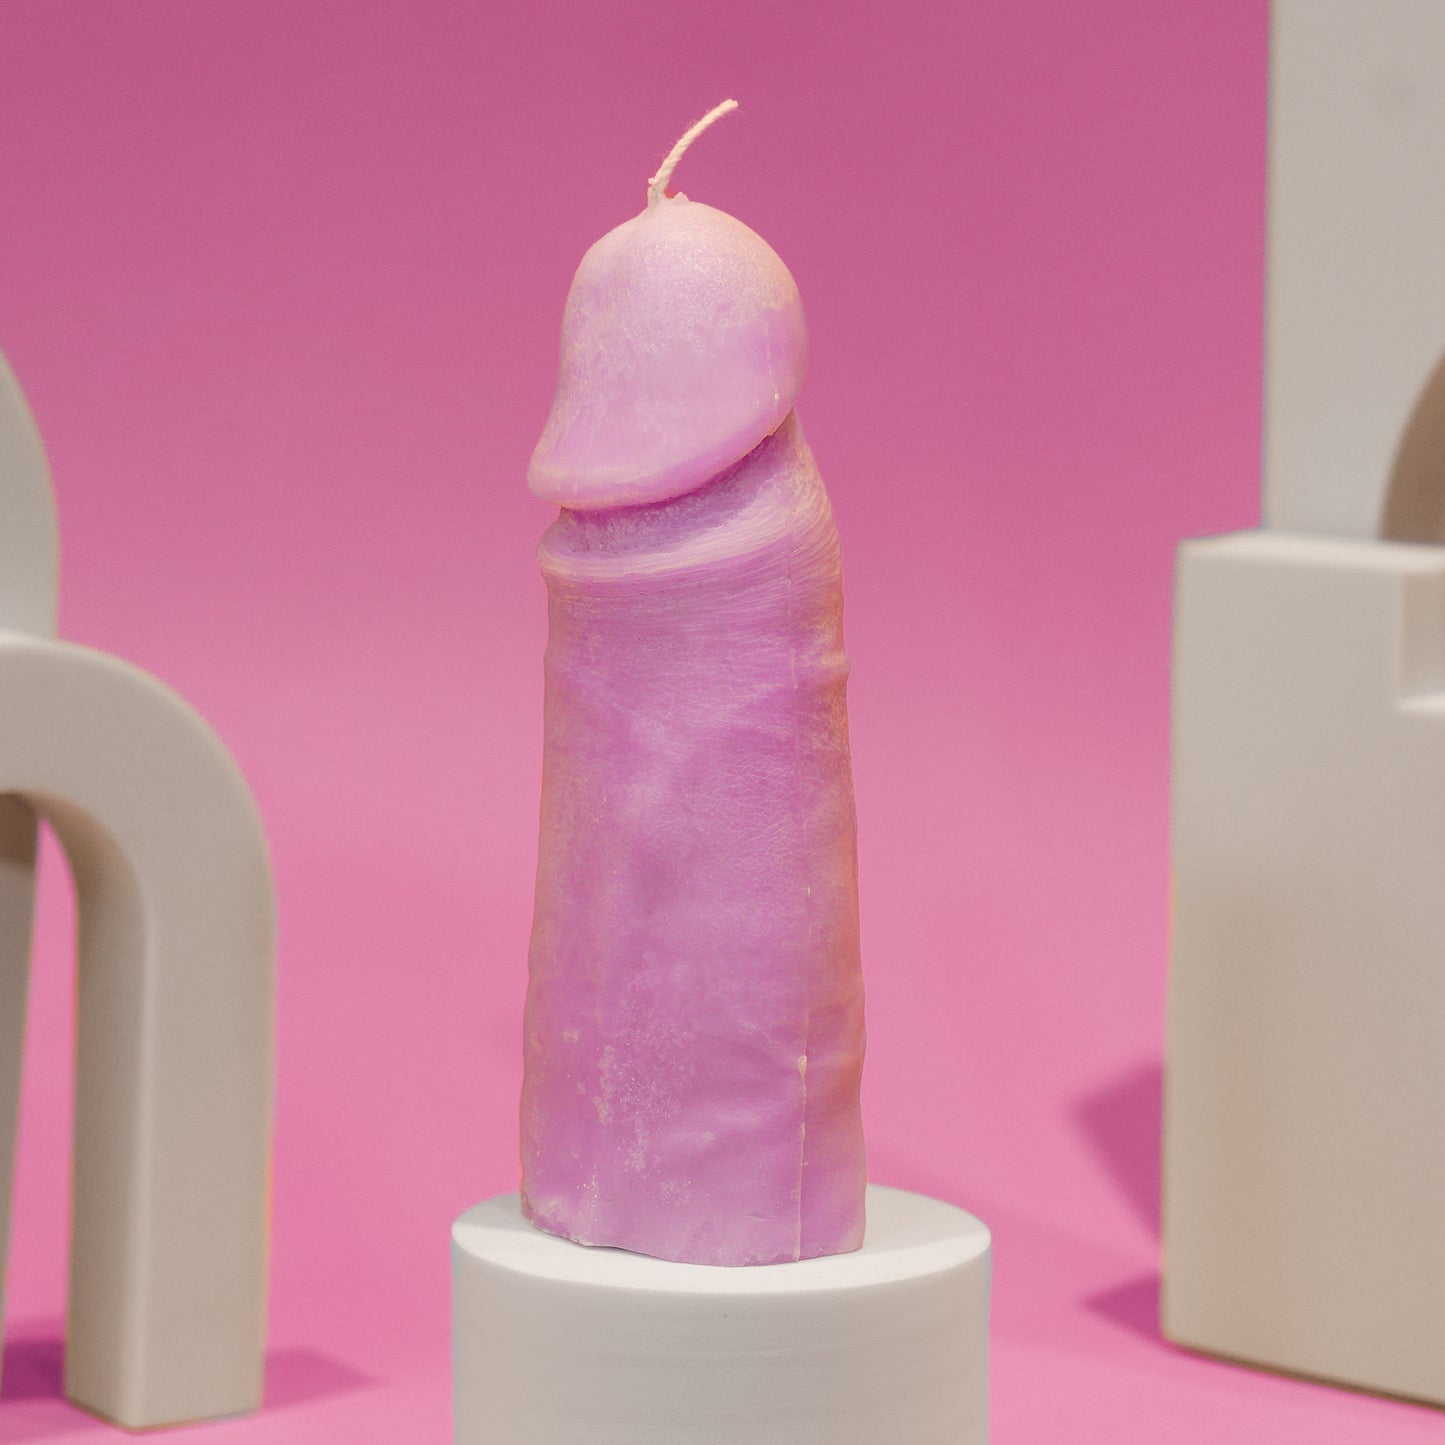 Realistic Giggeli penis candle from Helsinki, showcasing body diversity and promoting self-acceptance